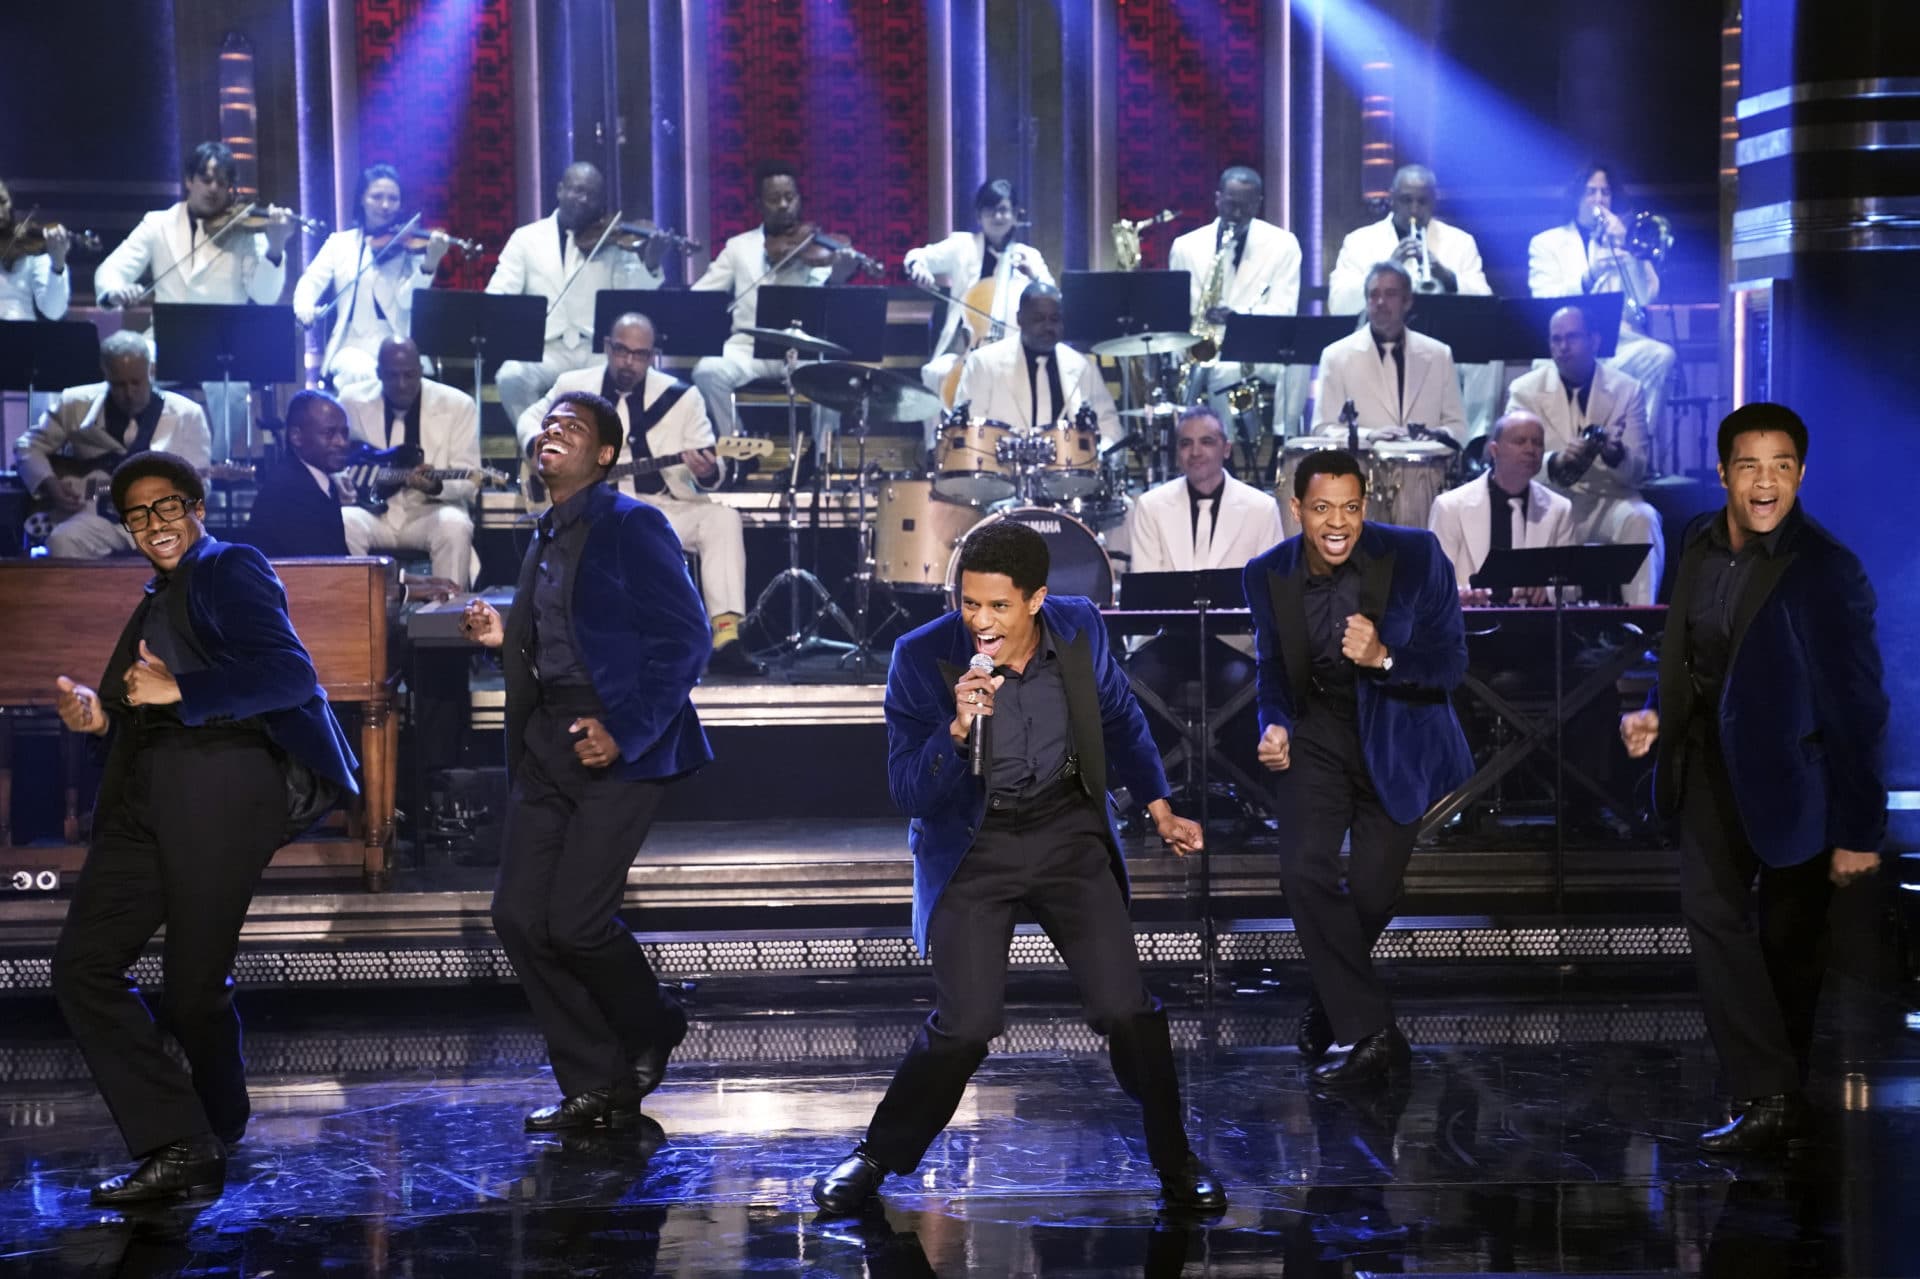 ‘Ain’t Too Proud’: Temptations Musical Gets 12 Tony Nominations